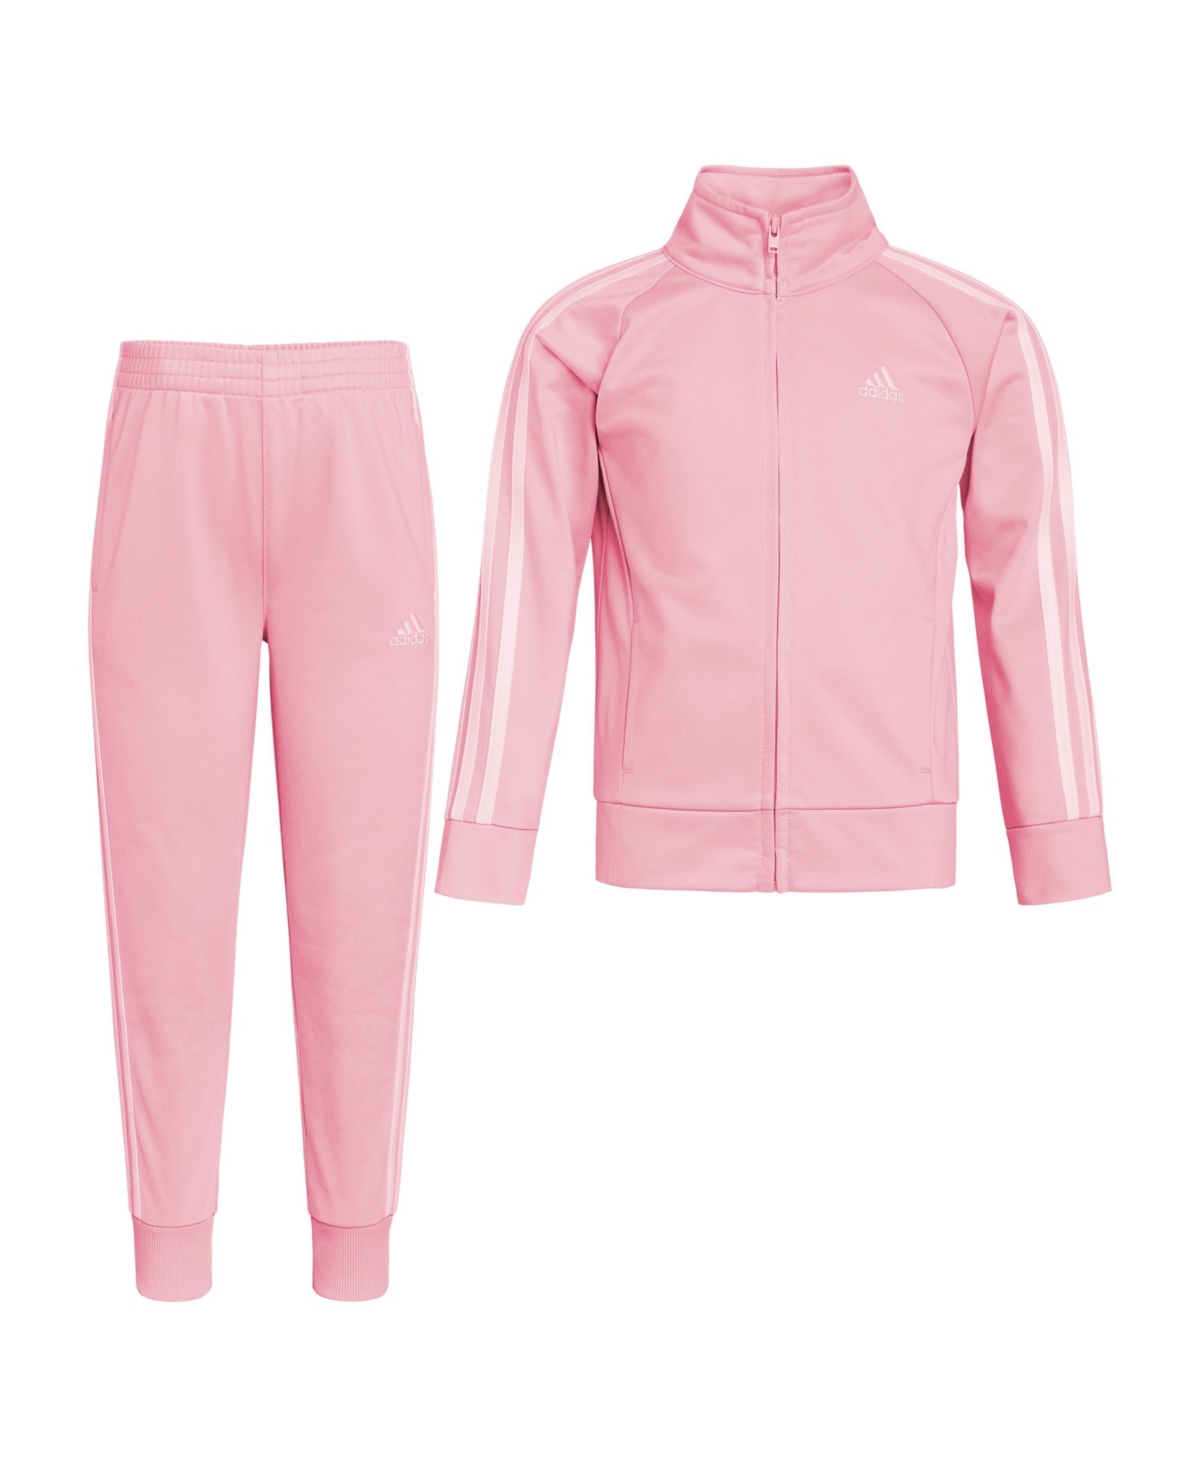 Shop Adidas Originals Little Girls Long Sleeves Classic Tricot Track Jacket And Pants, 2-piece Set In Light Pink